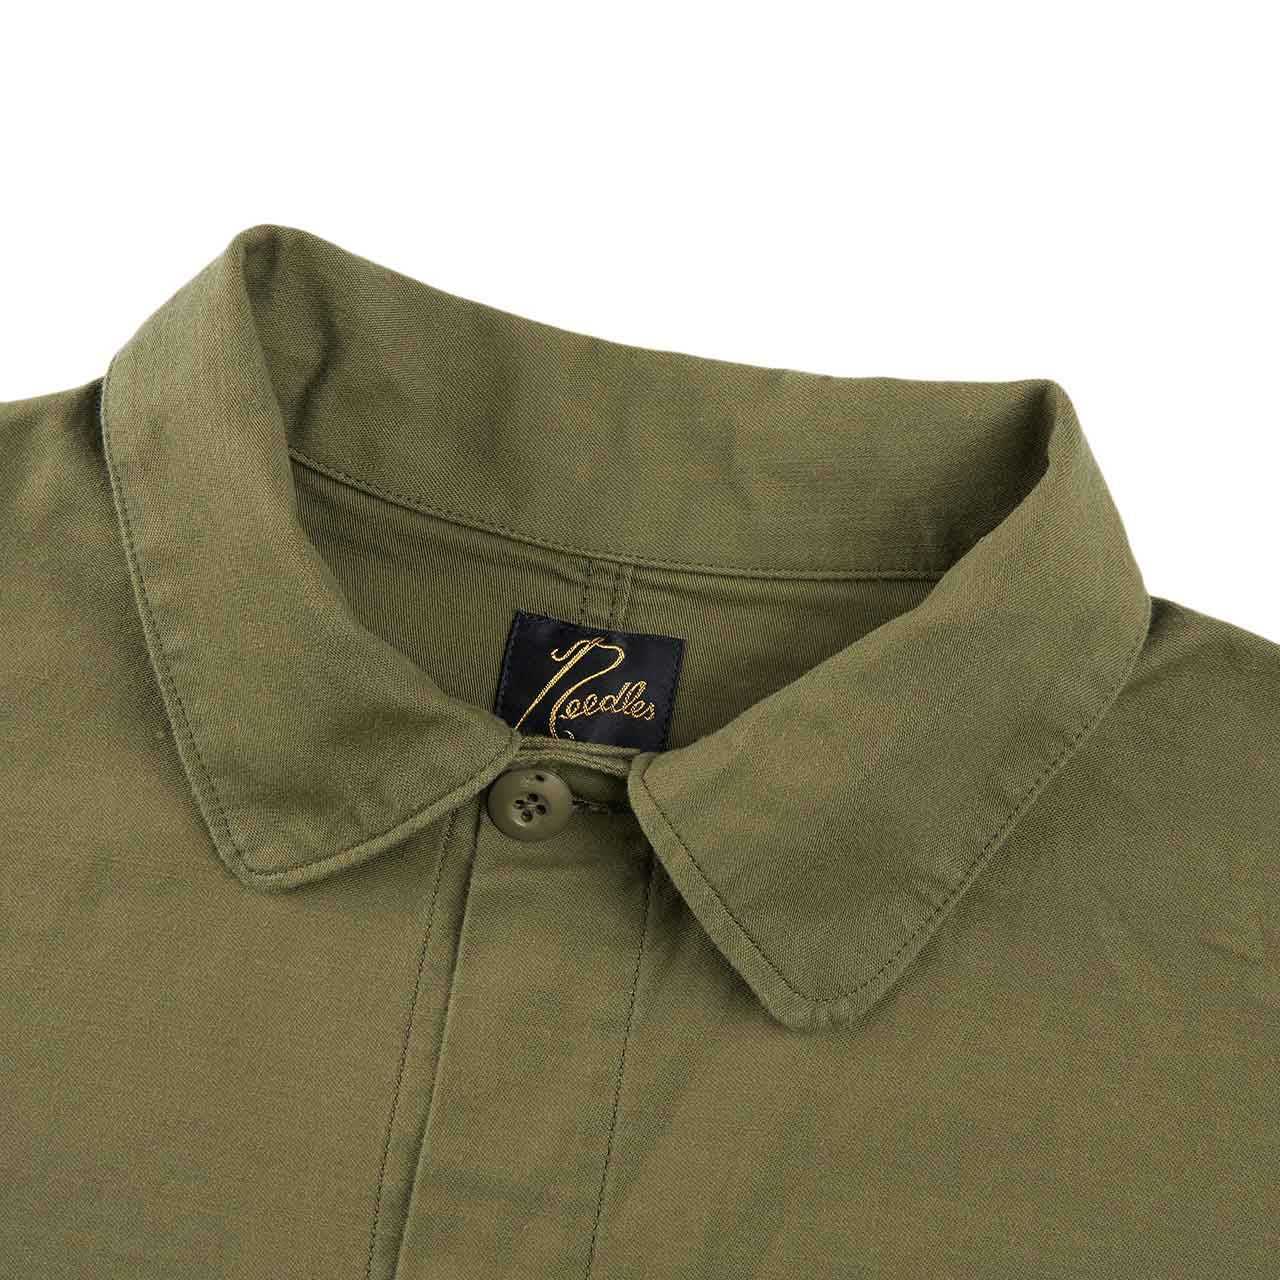 needles d.n. coverall jacket (olive)